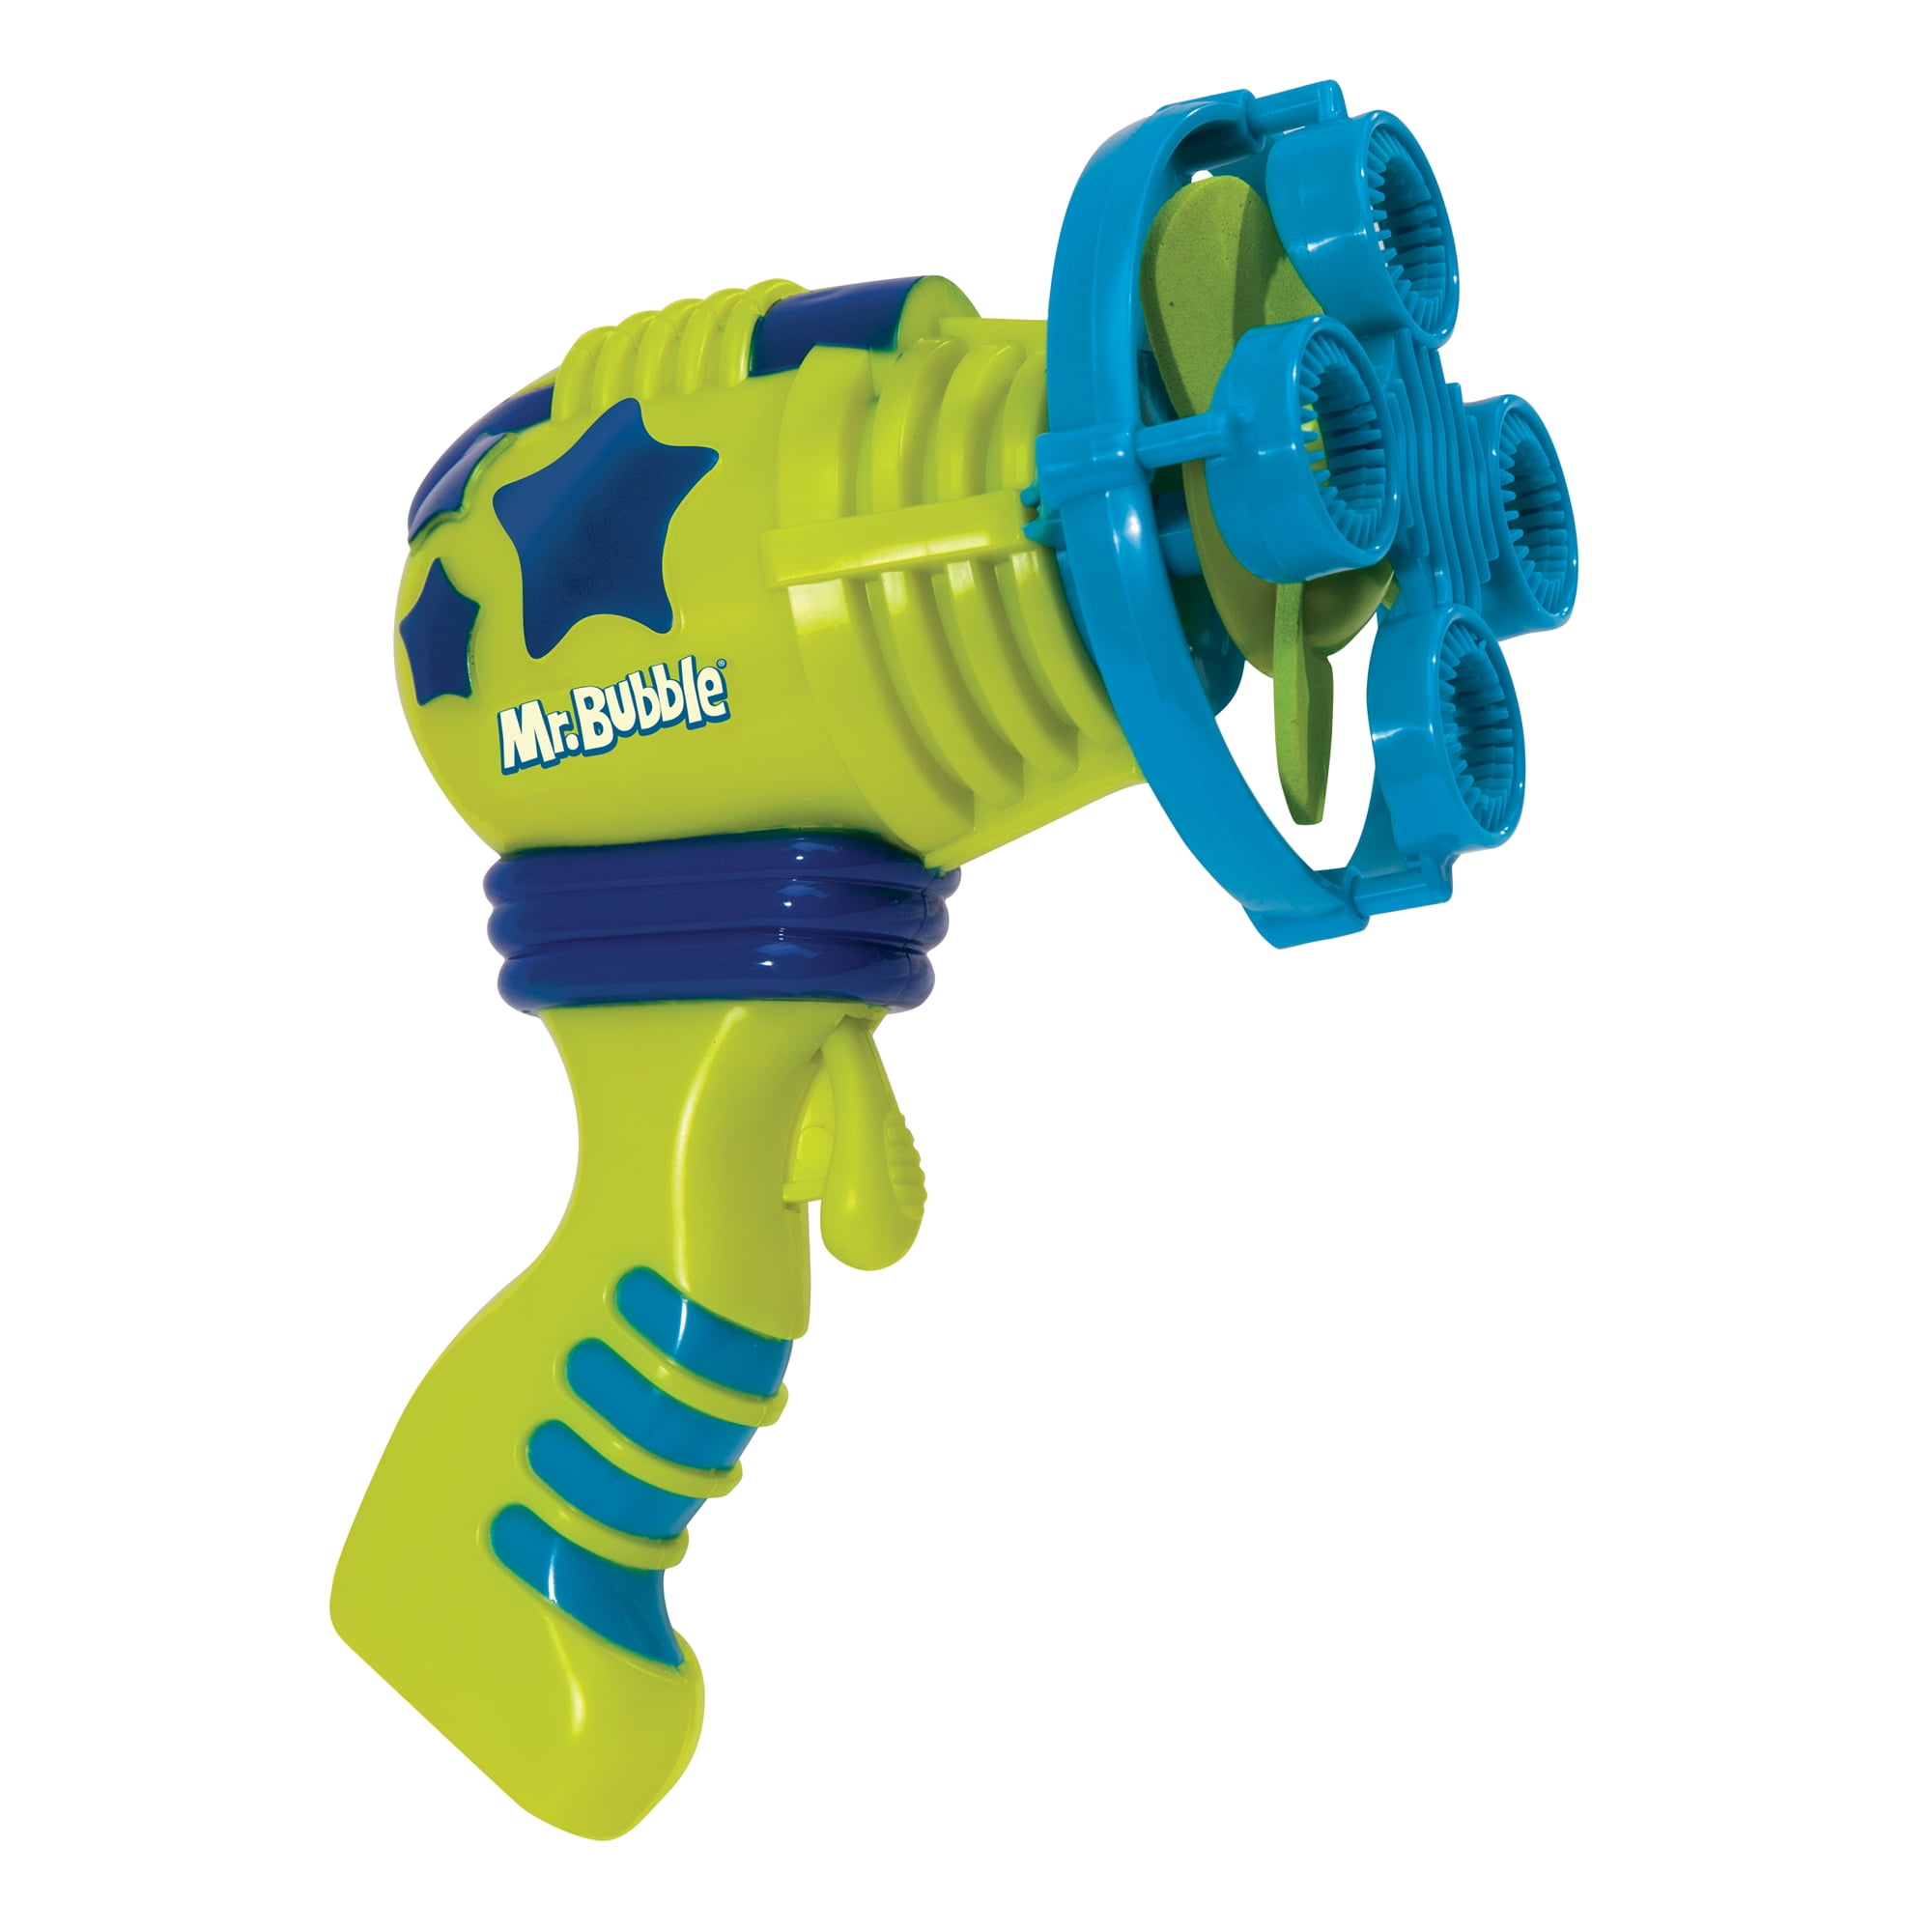 **FREE DELIVERY** Lights Up & Makes Fun Sounds Galactic Foam Blaster 